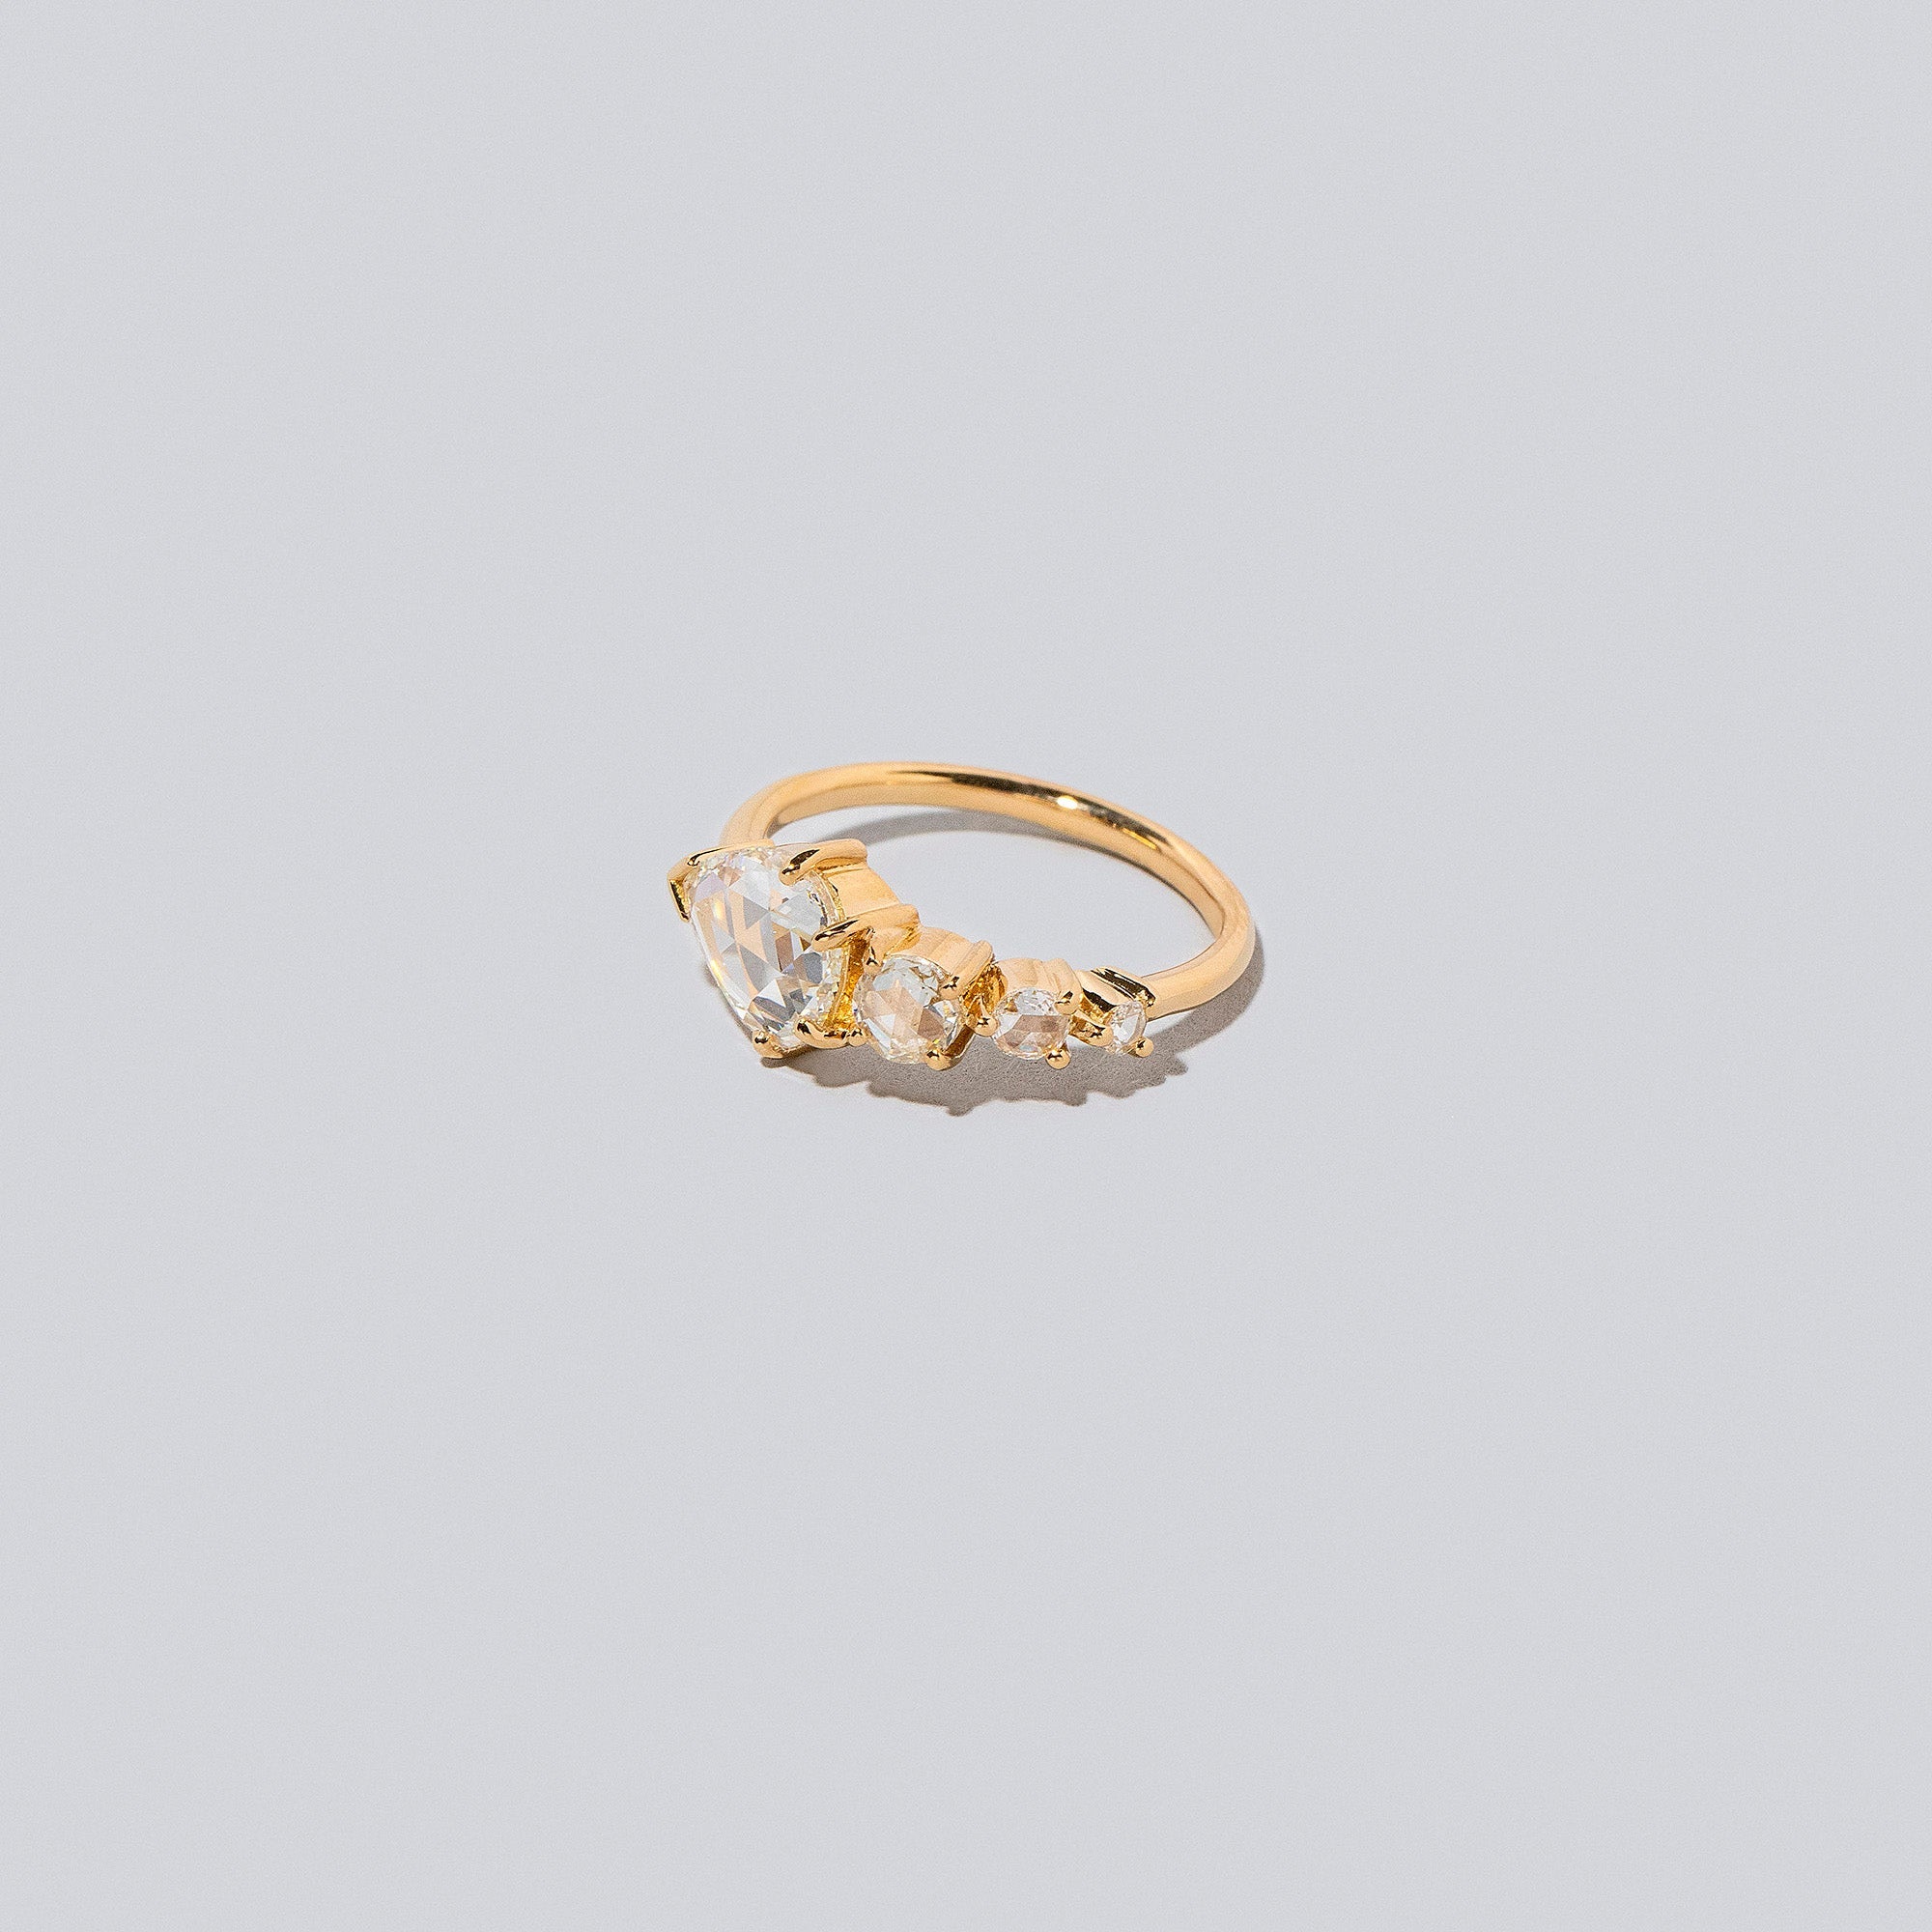 product_details:: Perennial Rings on light color background.